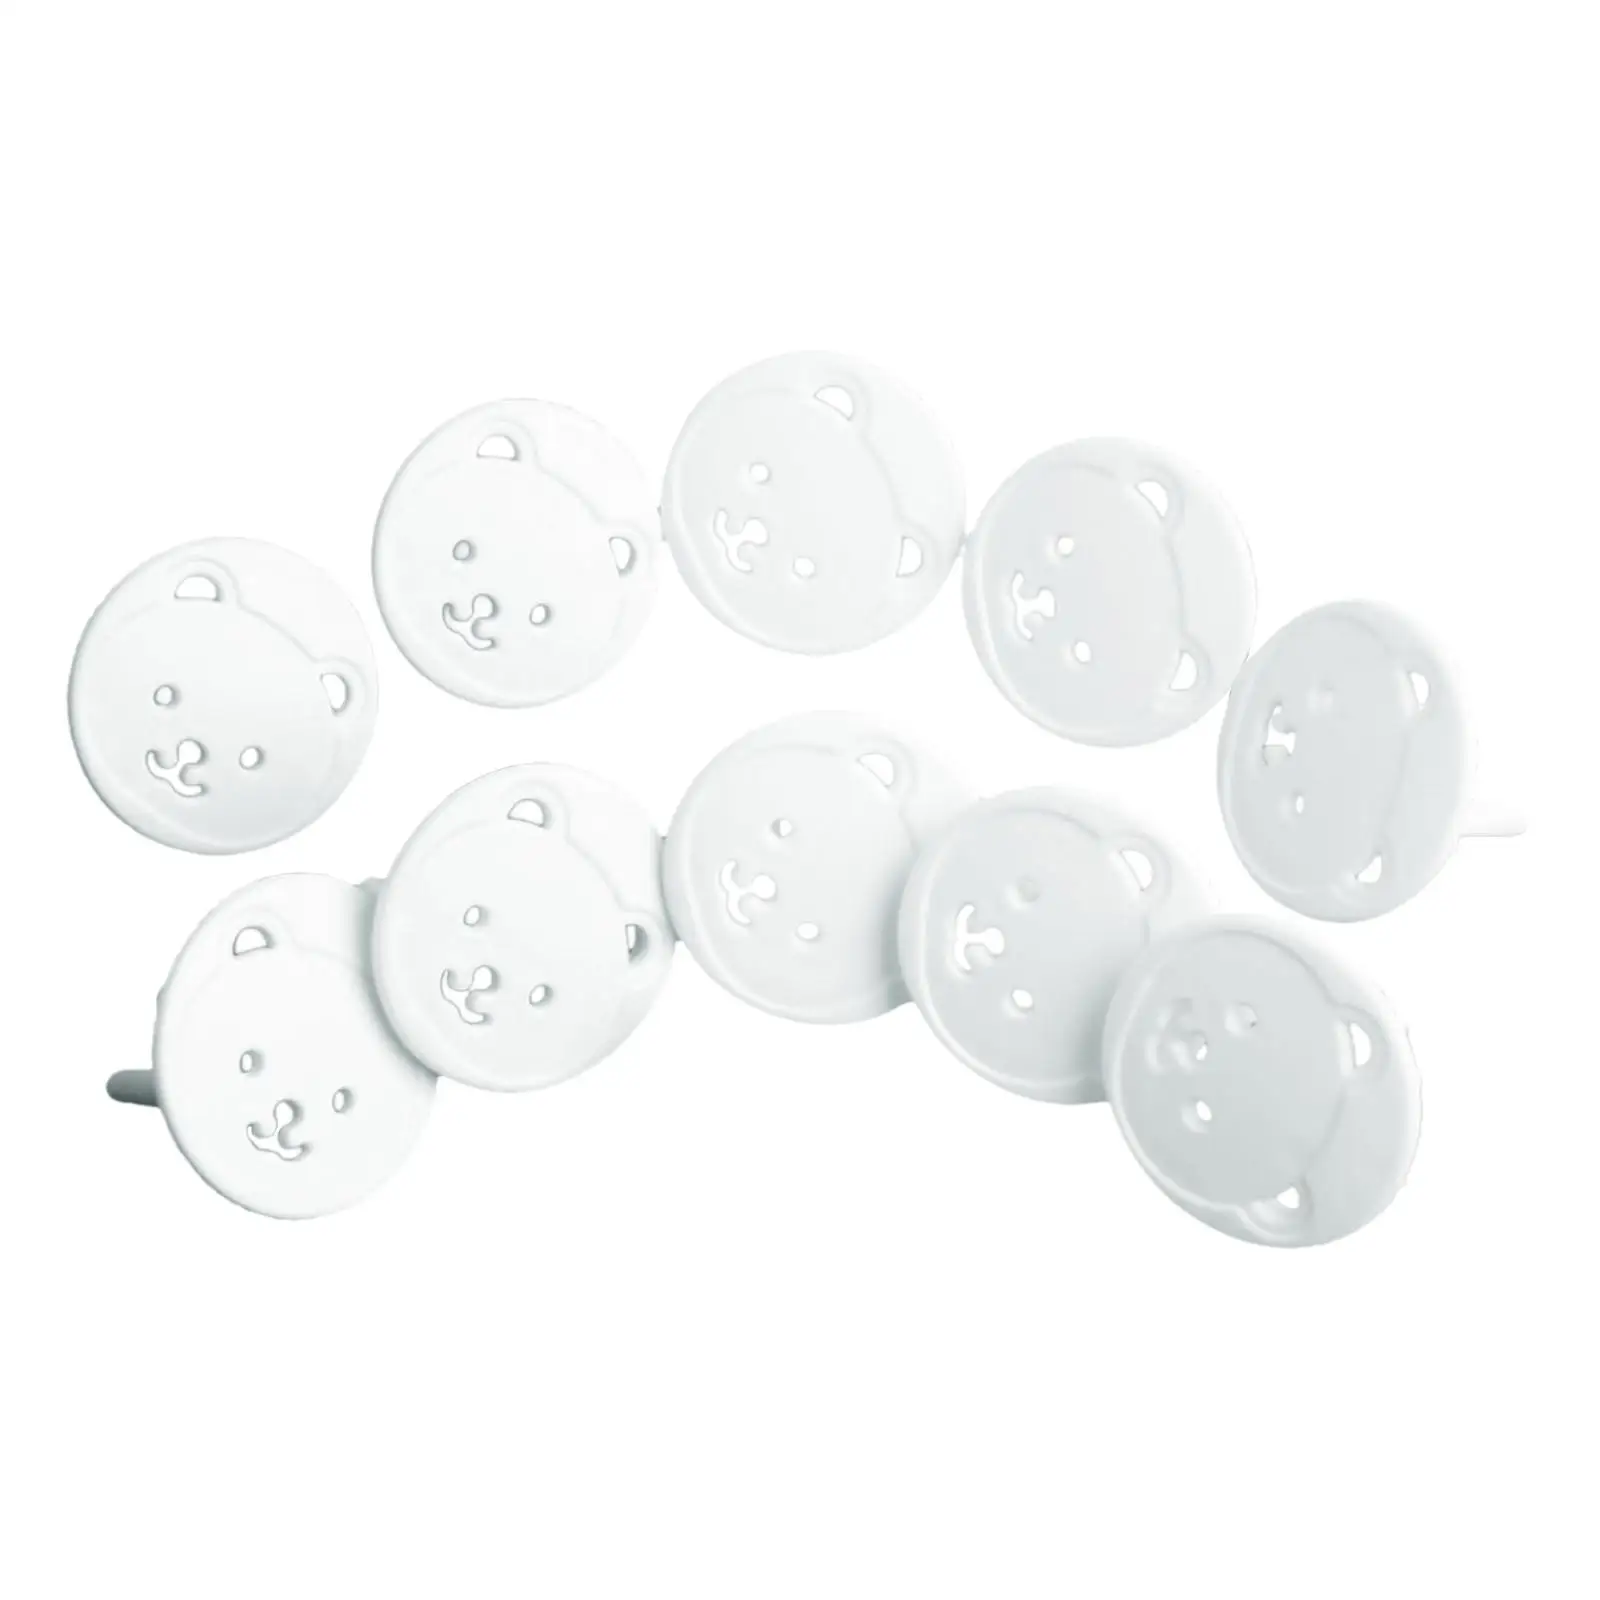 10Pcs Outlet Covers Baby Proofing Electric Plug Protectors Wall Socket Protector for Wall Kids